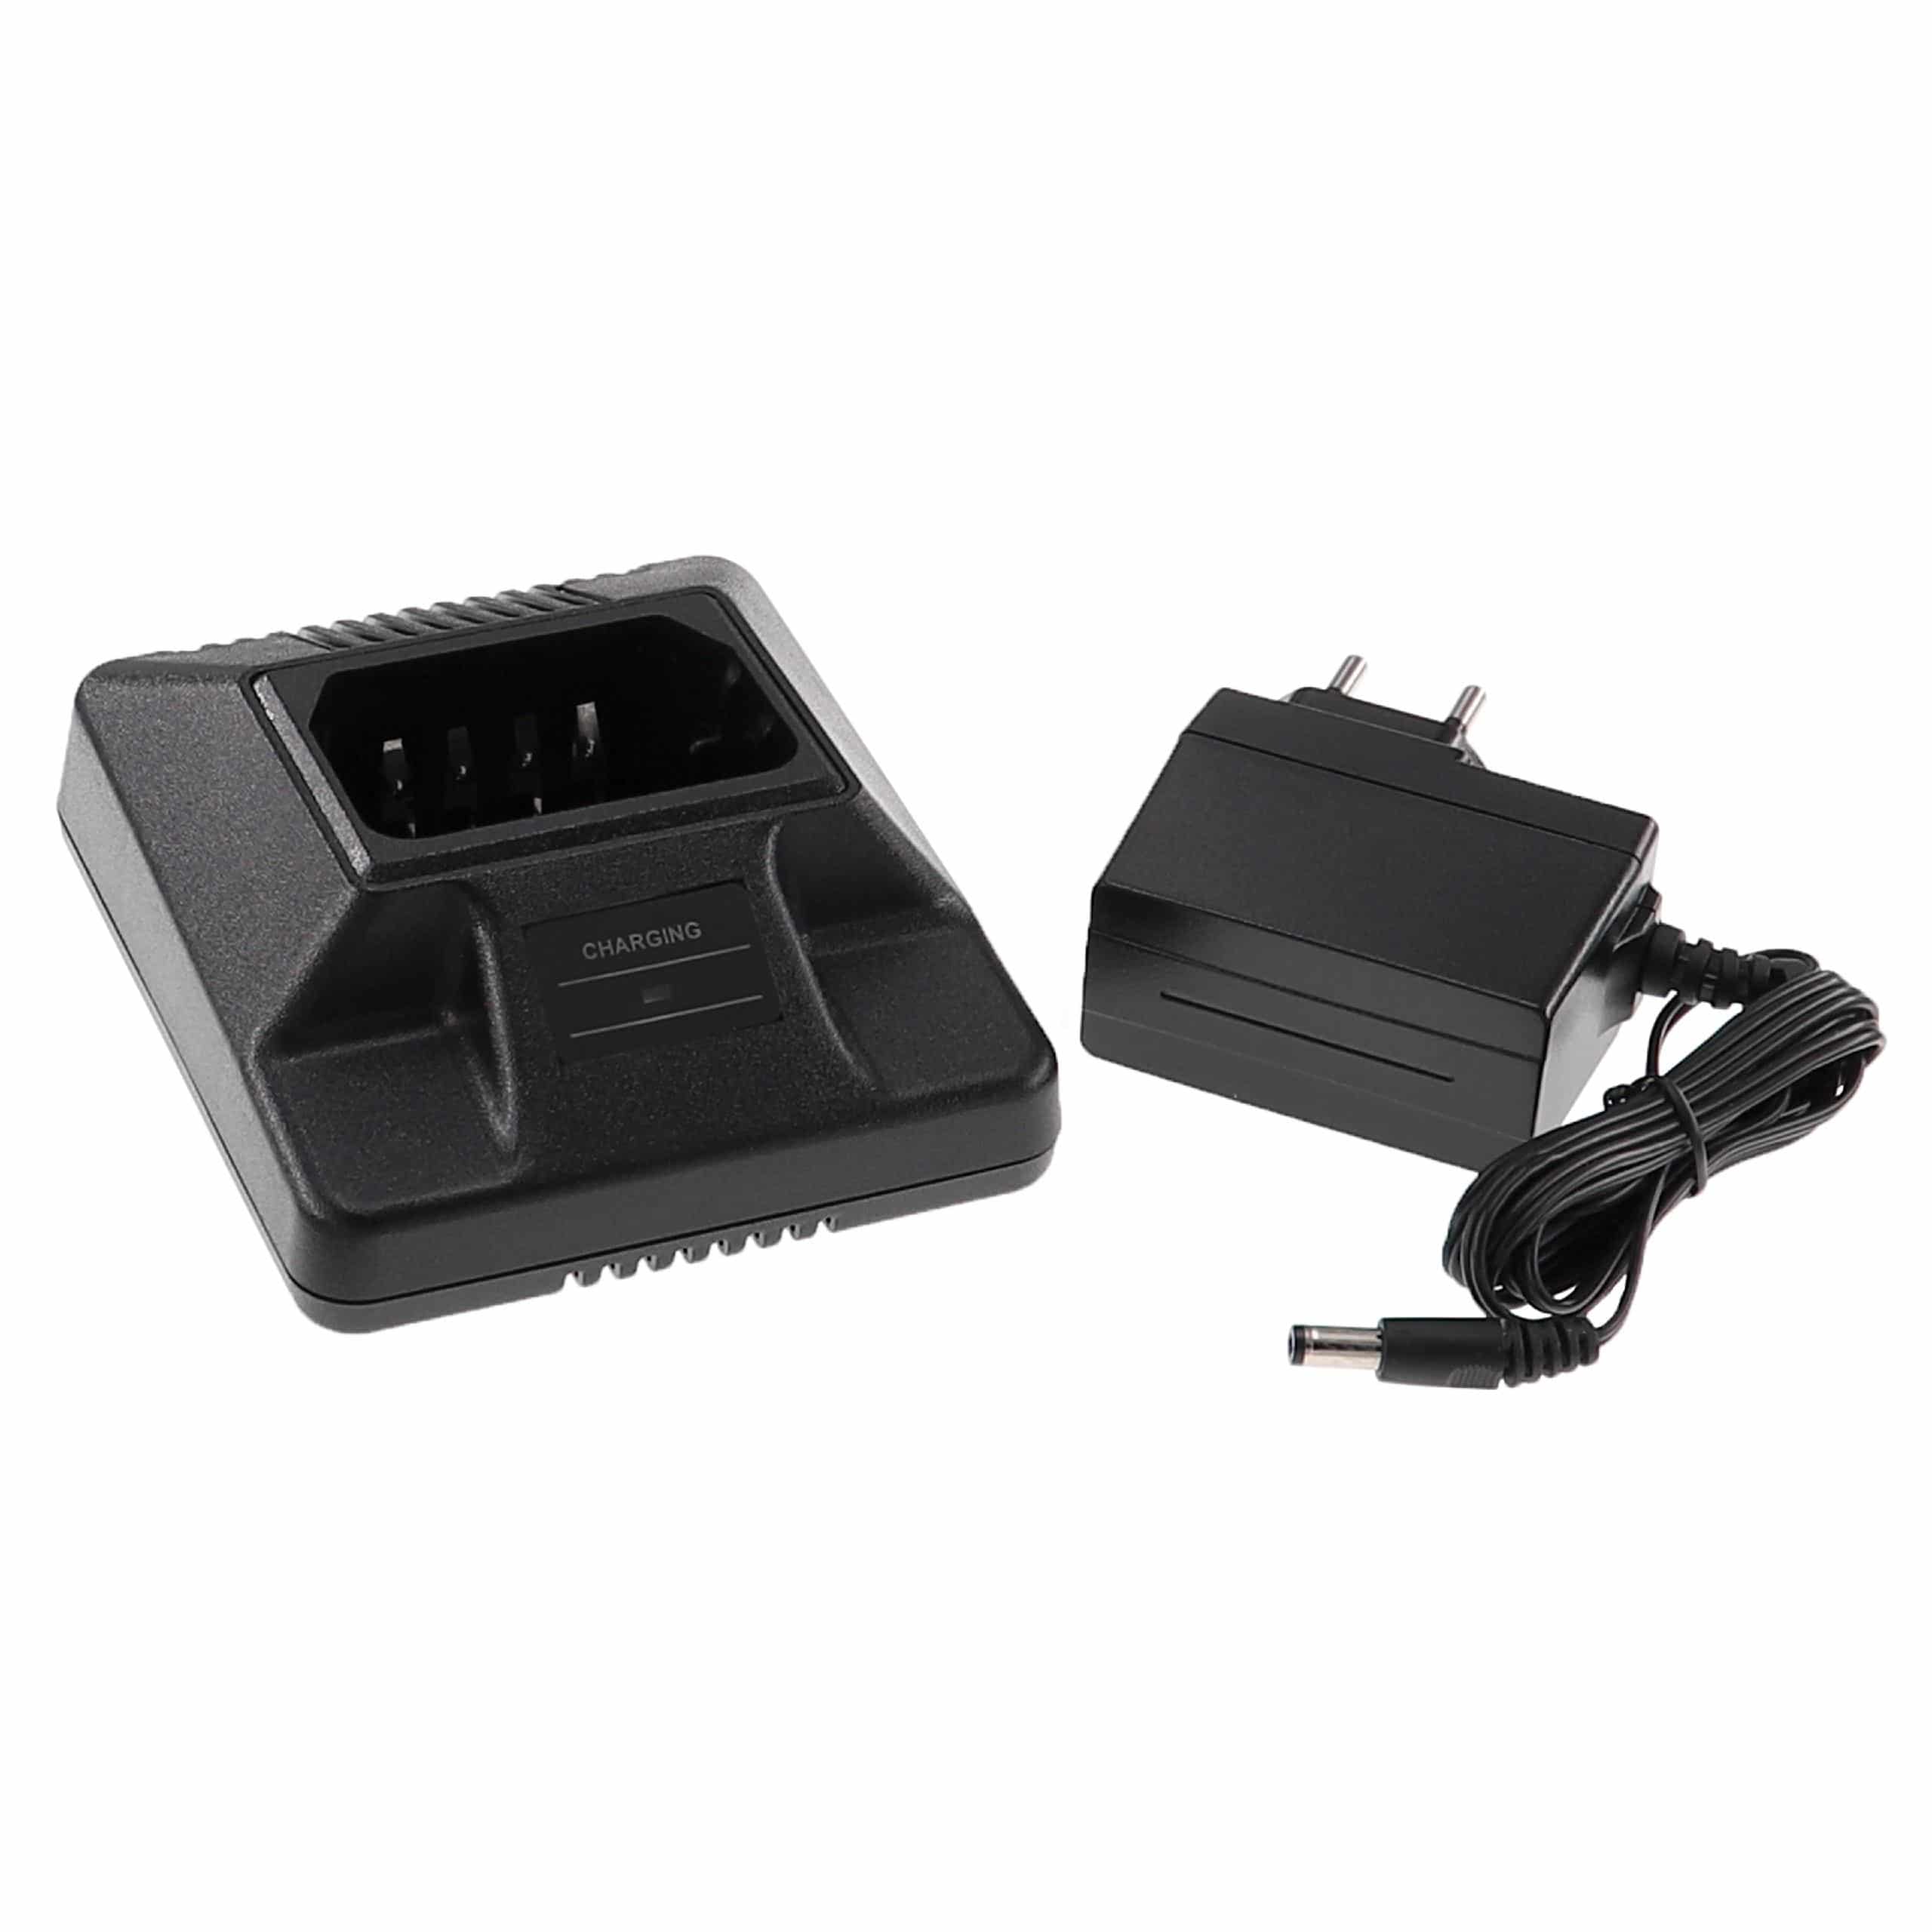 Charger Suitable for Motorola HTN9805A Radio Batteries - 12.0 V